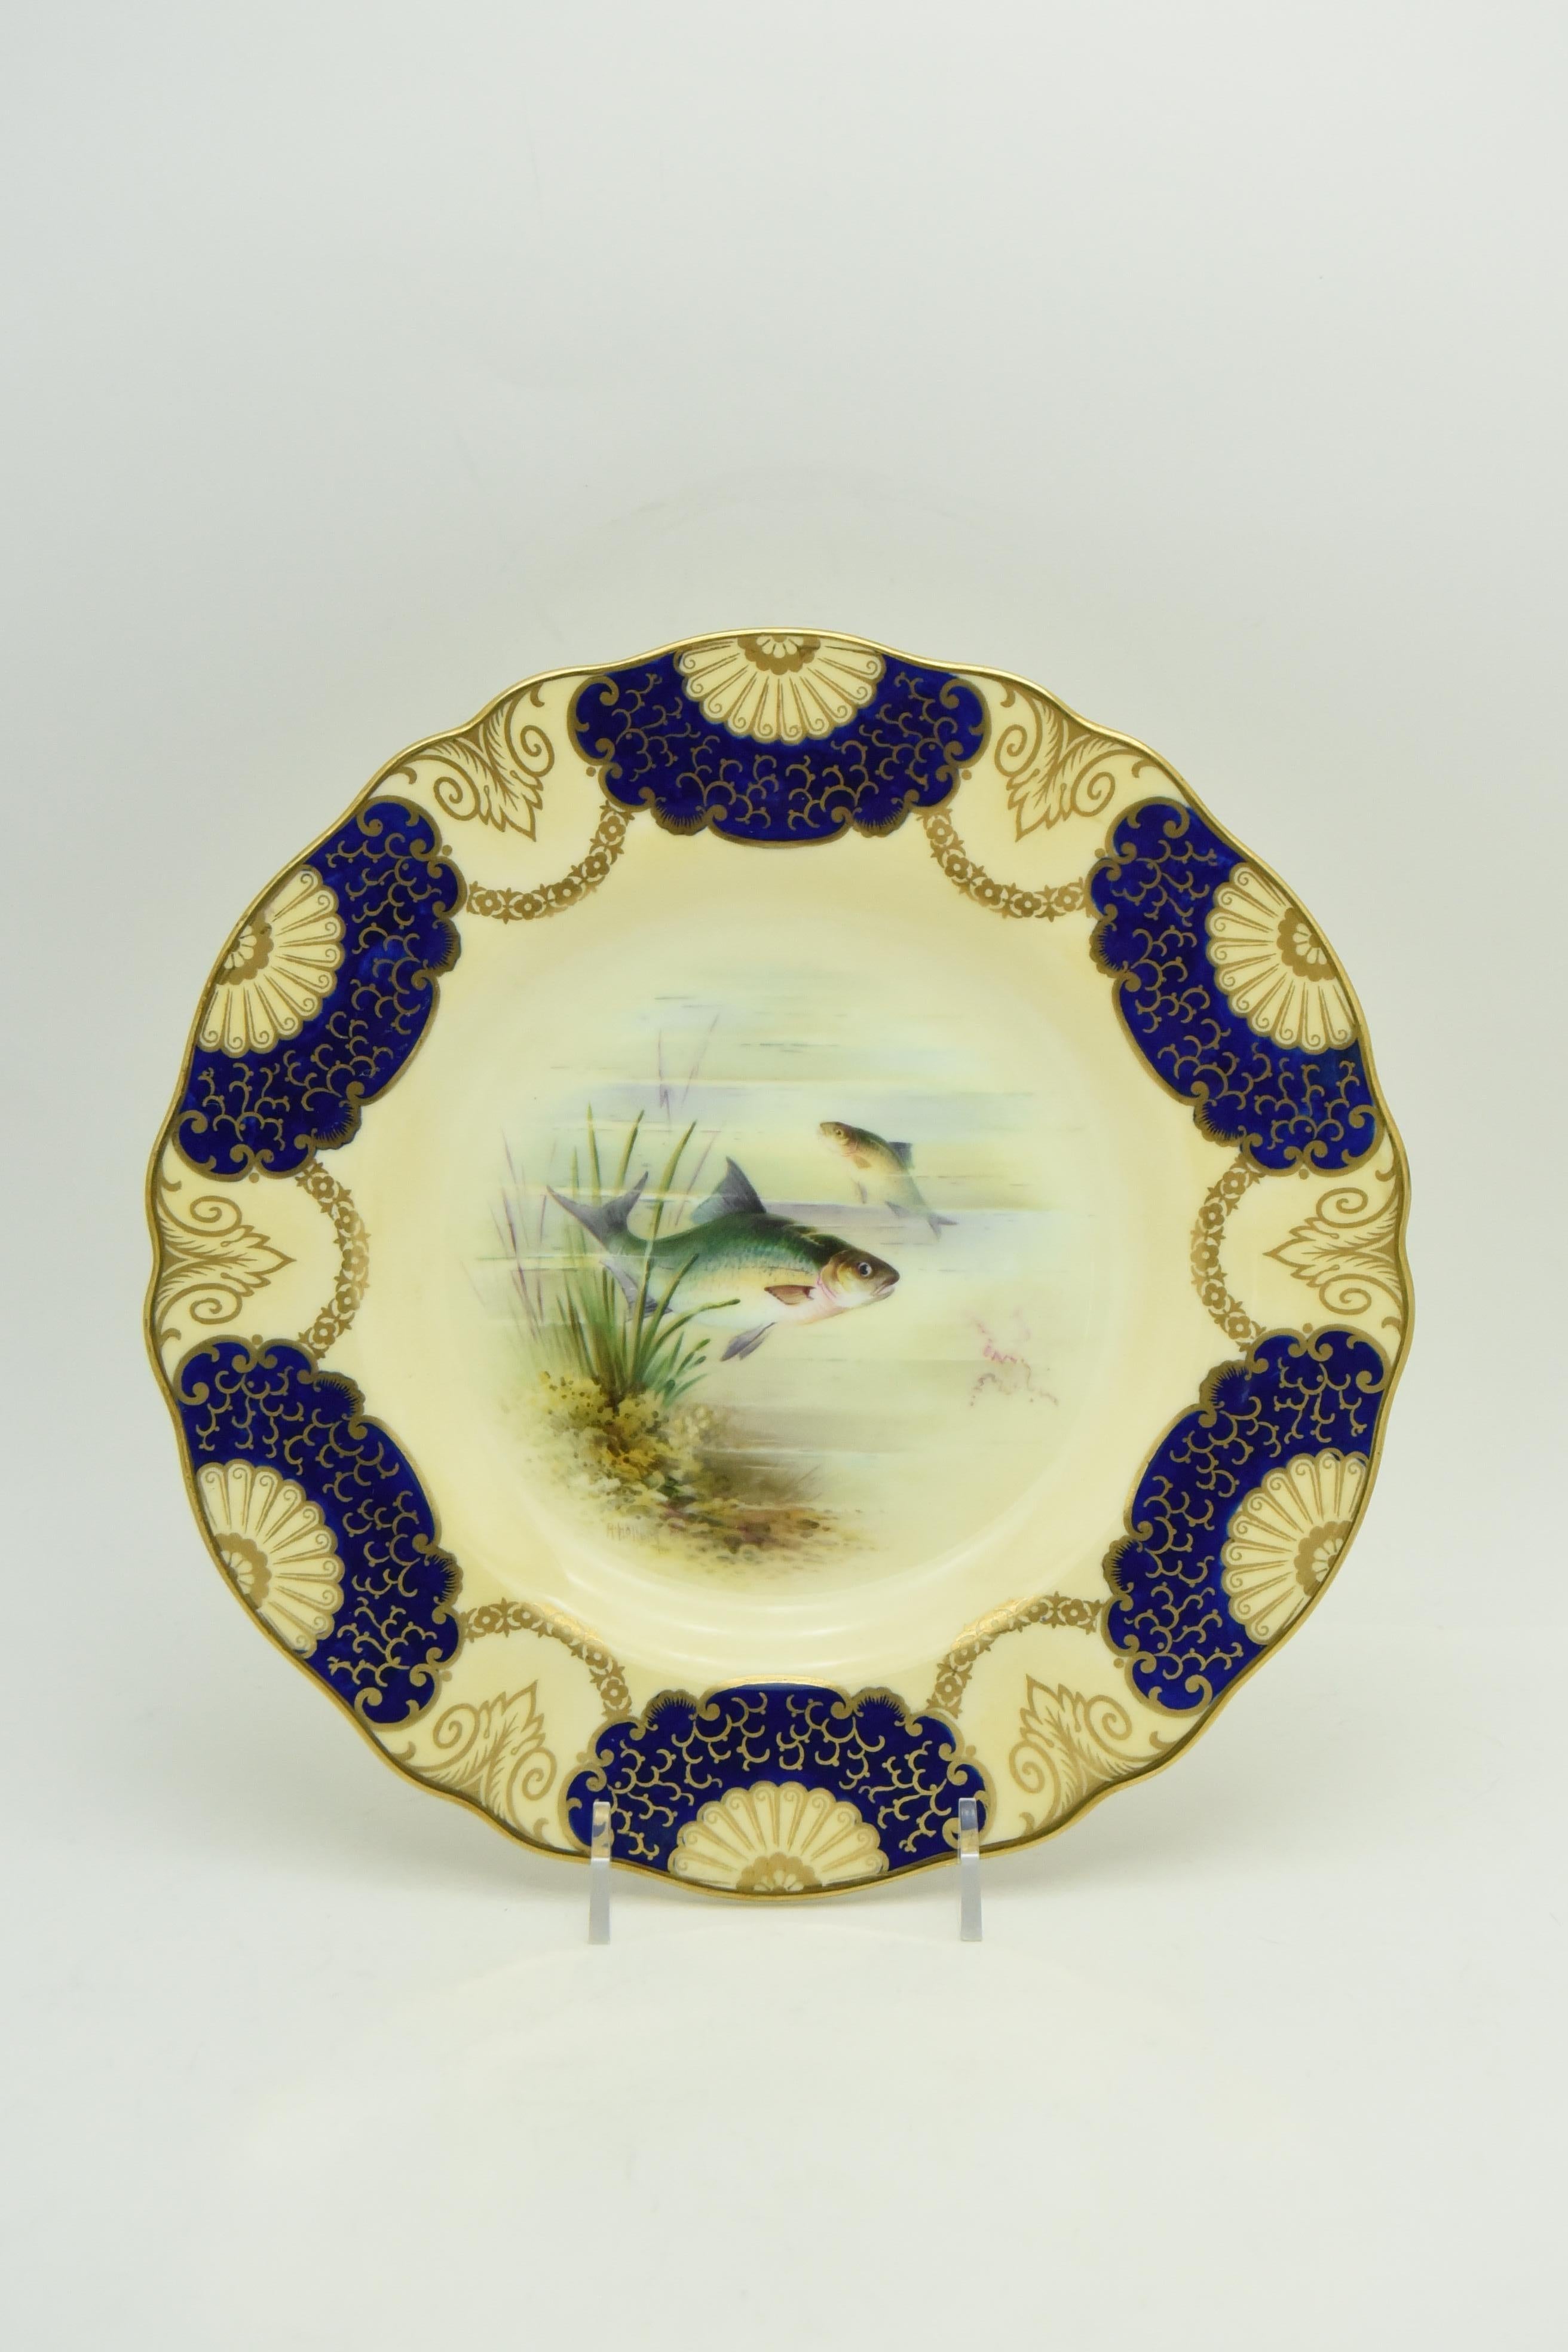 Set of 16 Wedgwood Hand Painted Artist Signed Cobalt Gilt Fish Plates In Good Condition For Sale In Great Barrington, MA